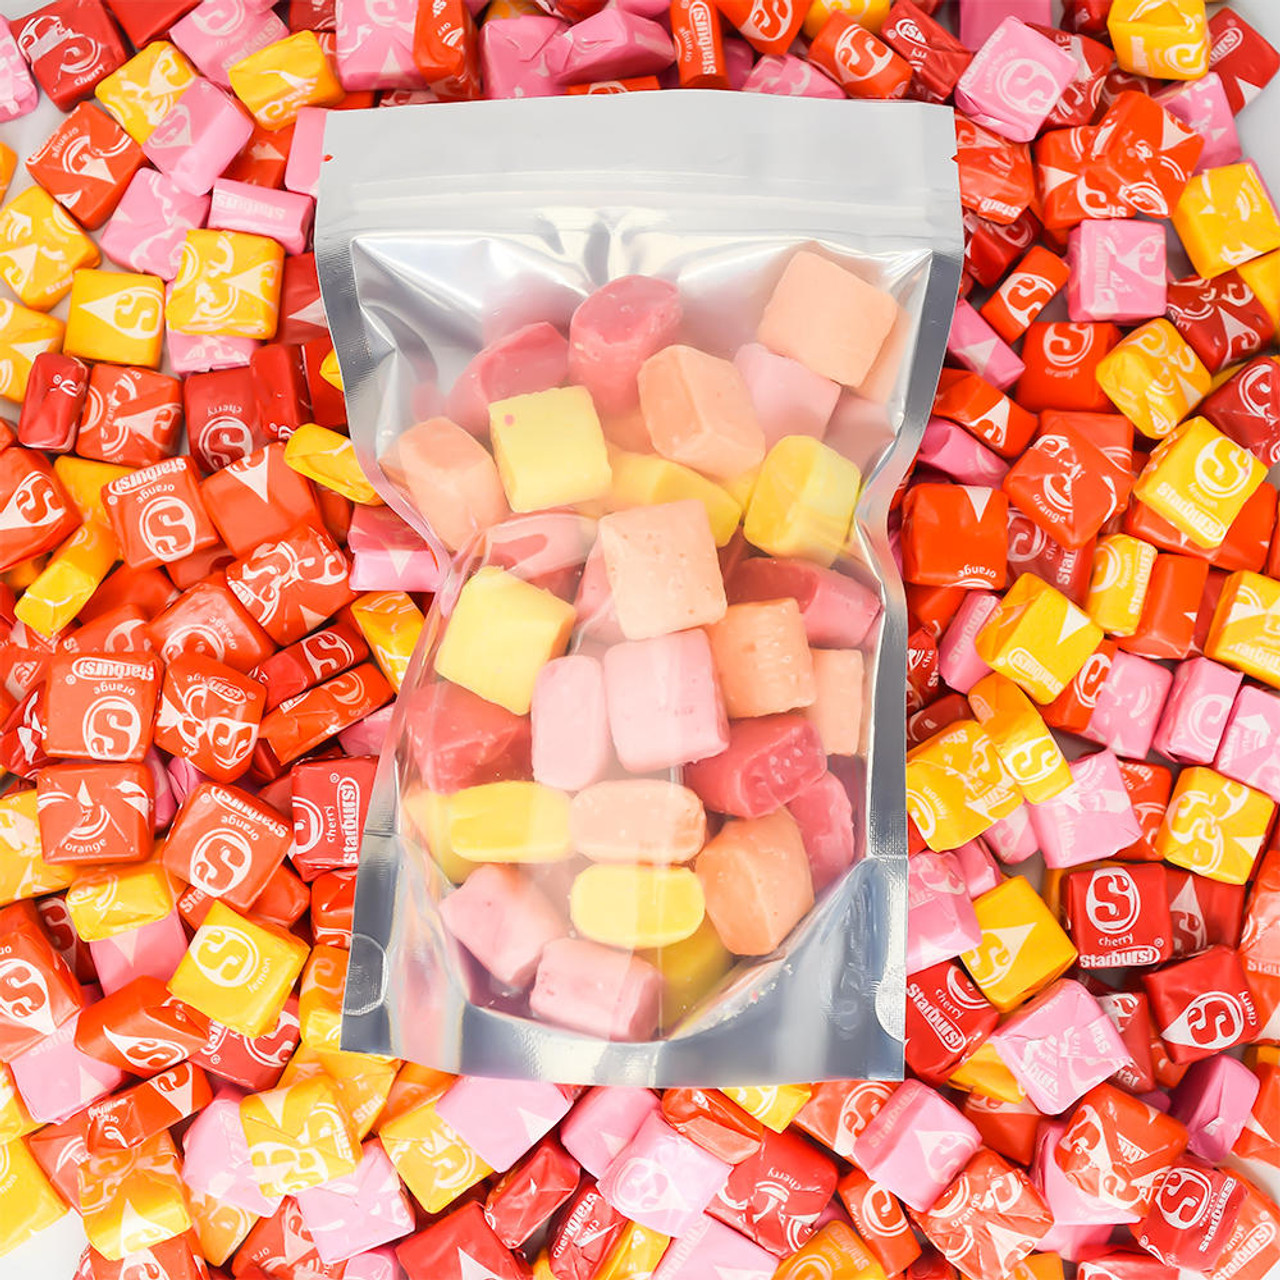 https://cdn11.bigcommerce.com/s-oxoxmgwste/product_images/uploaded_images/fun-fair-treats-freeze-dried-starburst-asst-49106.jpg